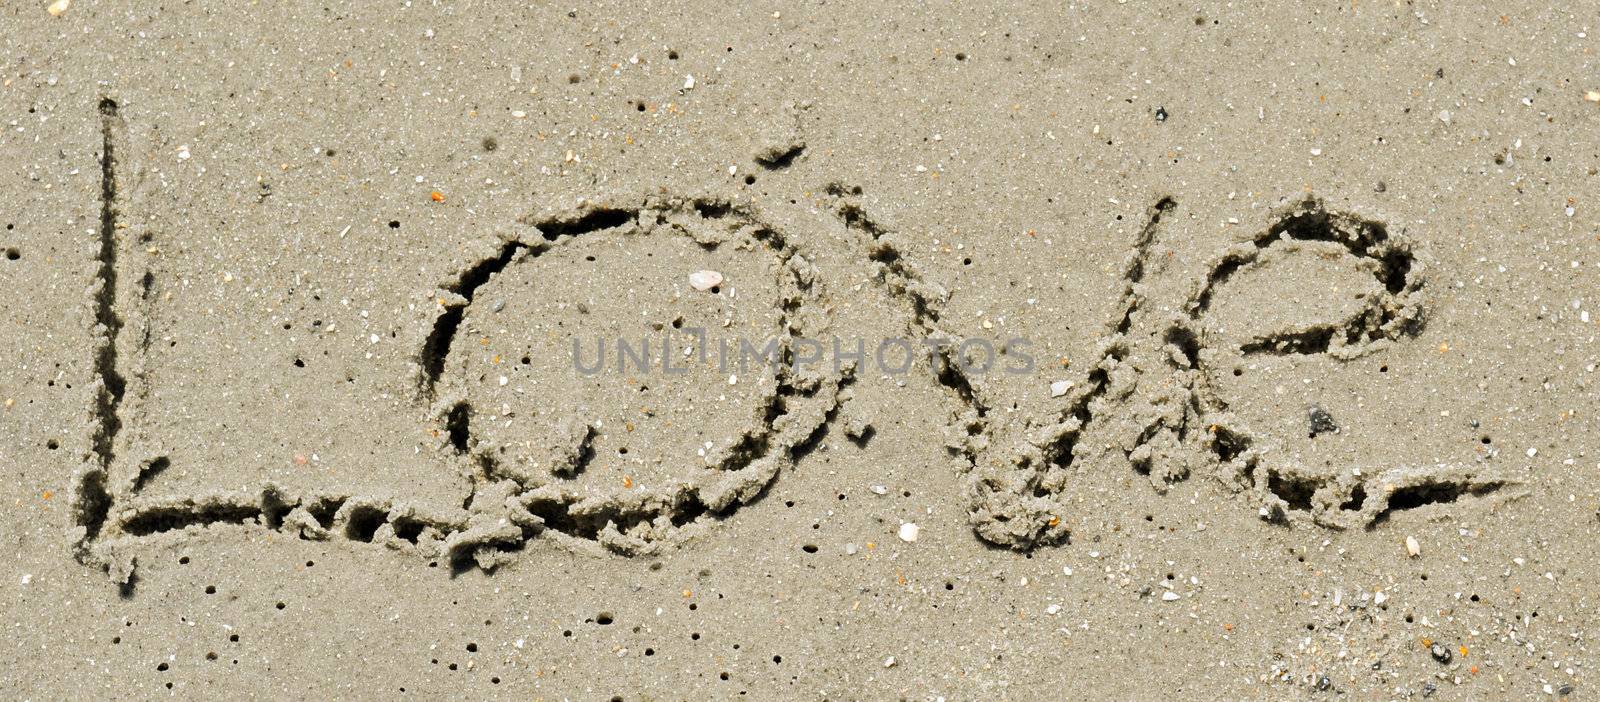 Love in the sand by RefocusPhoto